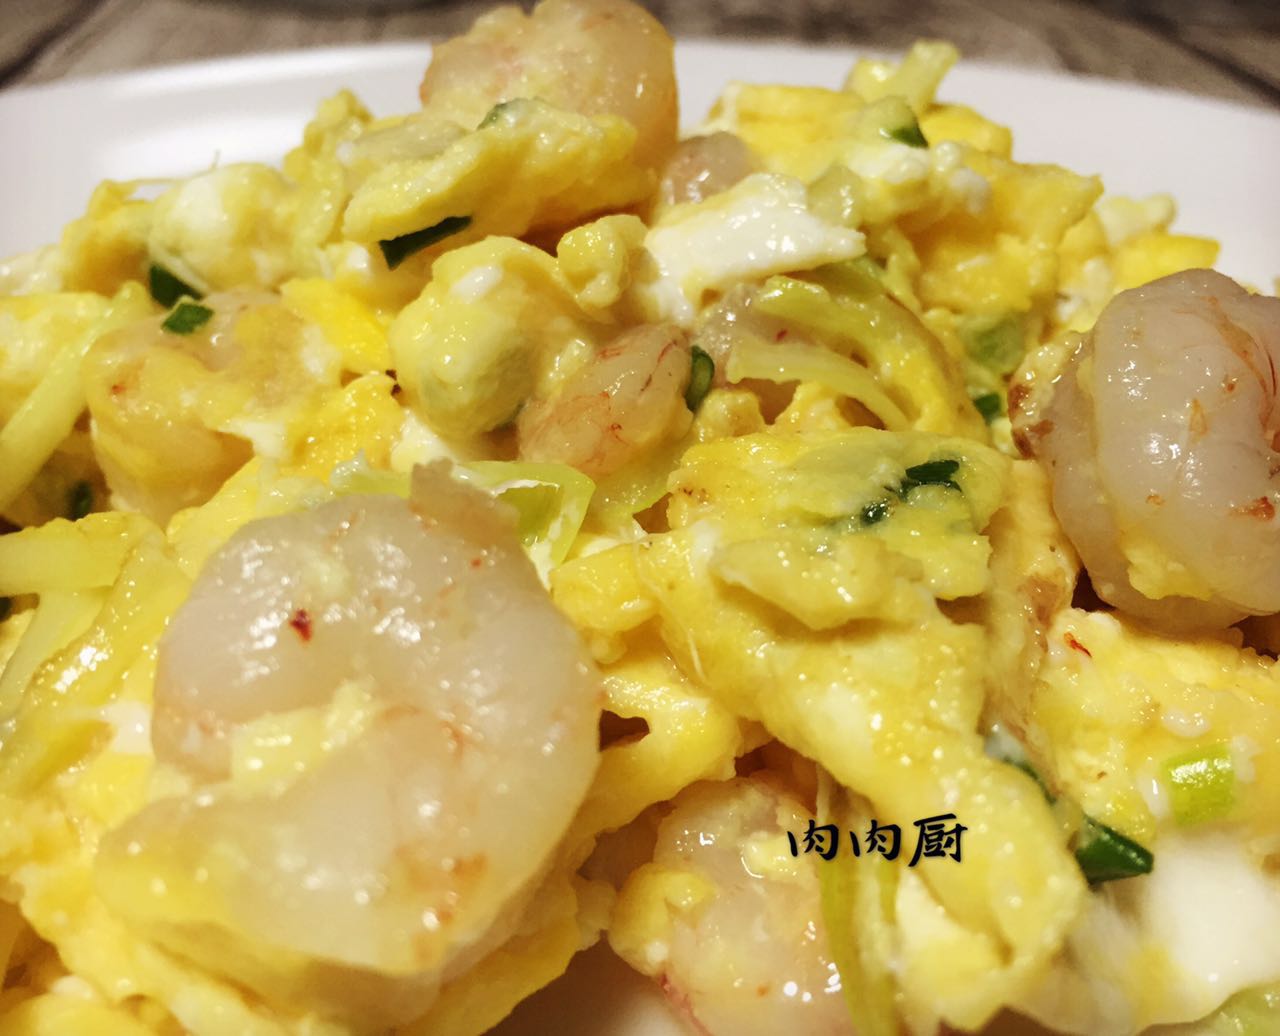 Scrambled Egg with Chives and Shrimp